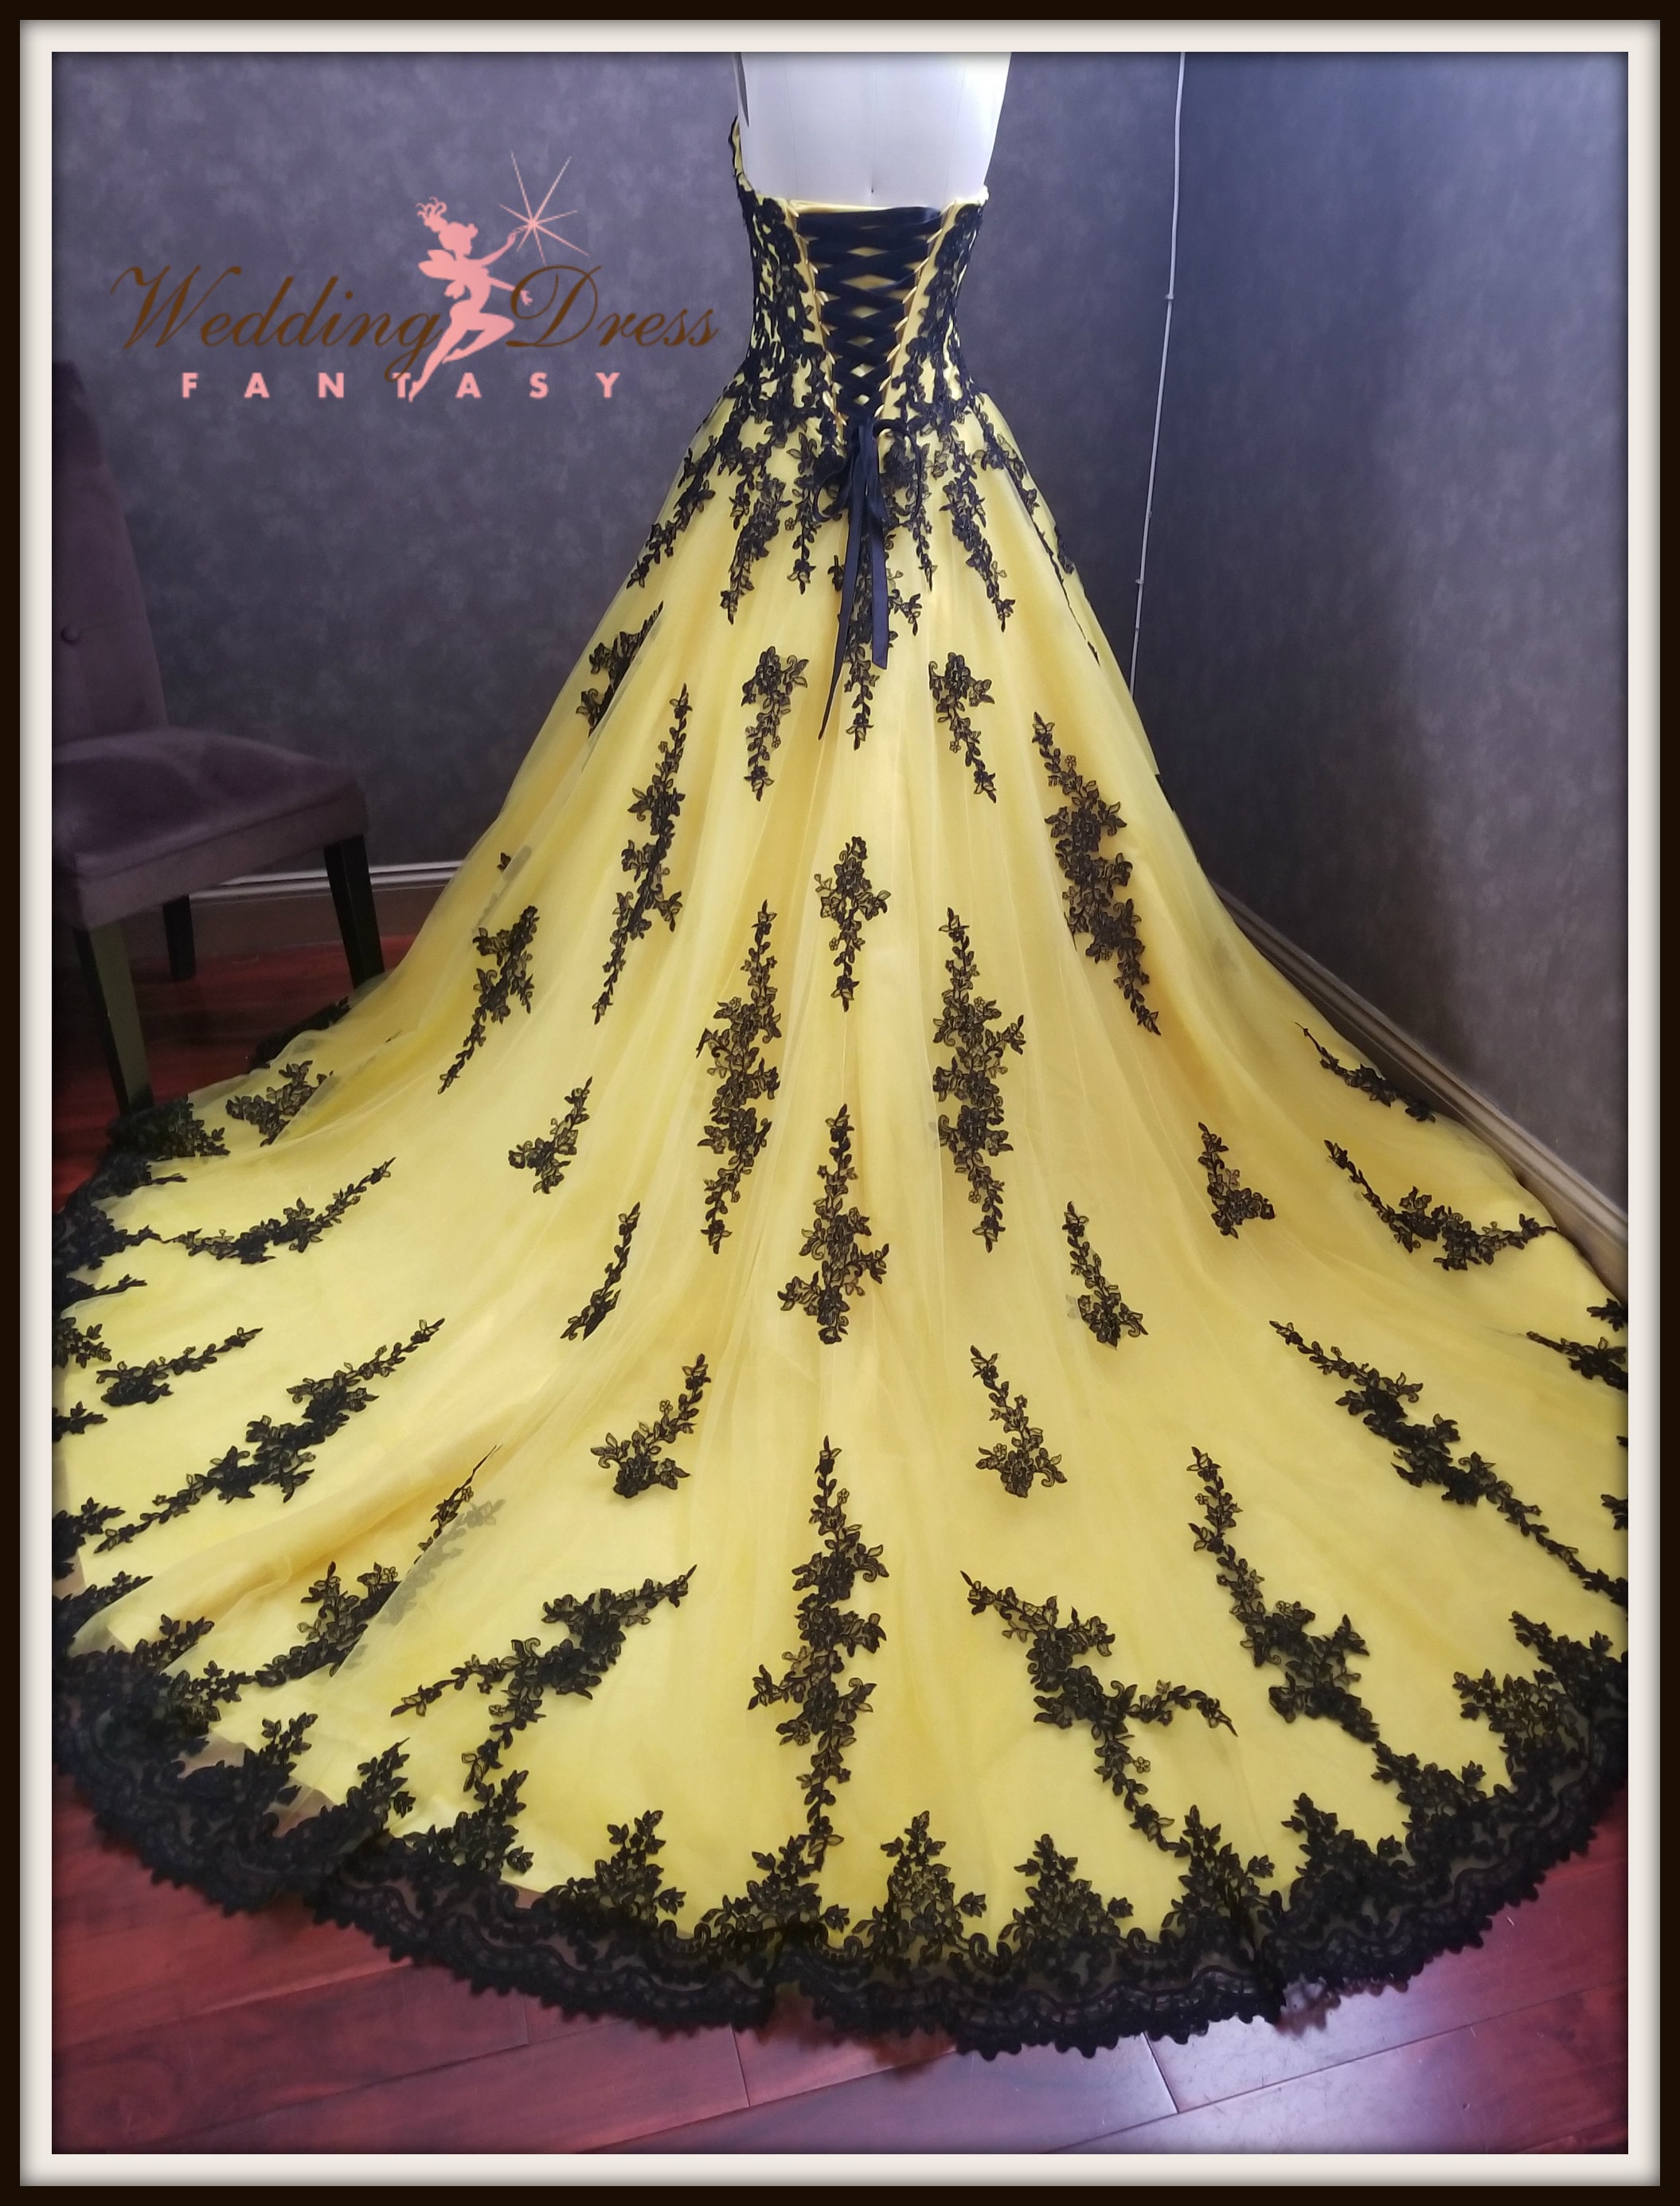 Lexica - 4k high quality photo of a beatiful black lady wearing yellow gown.